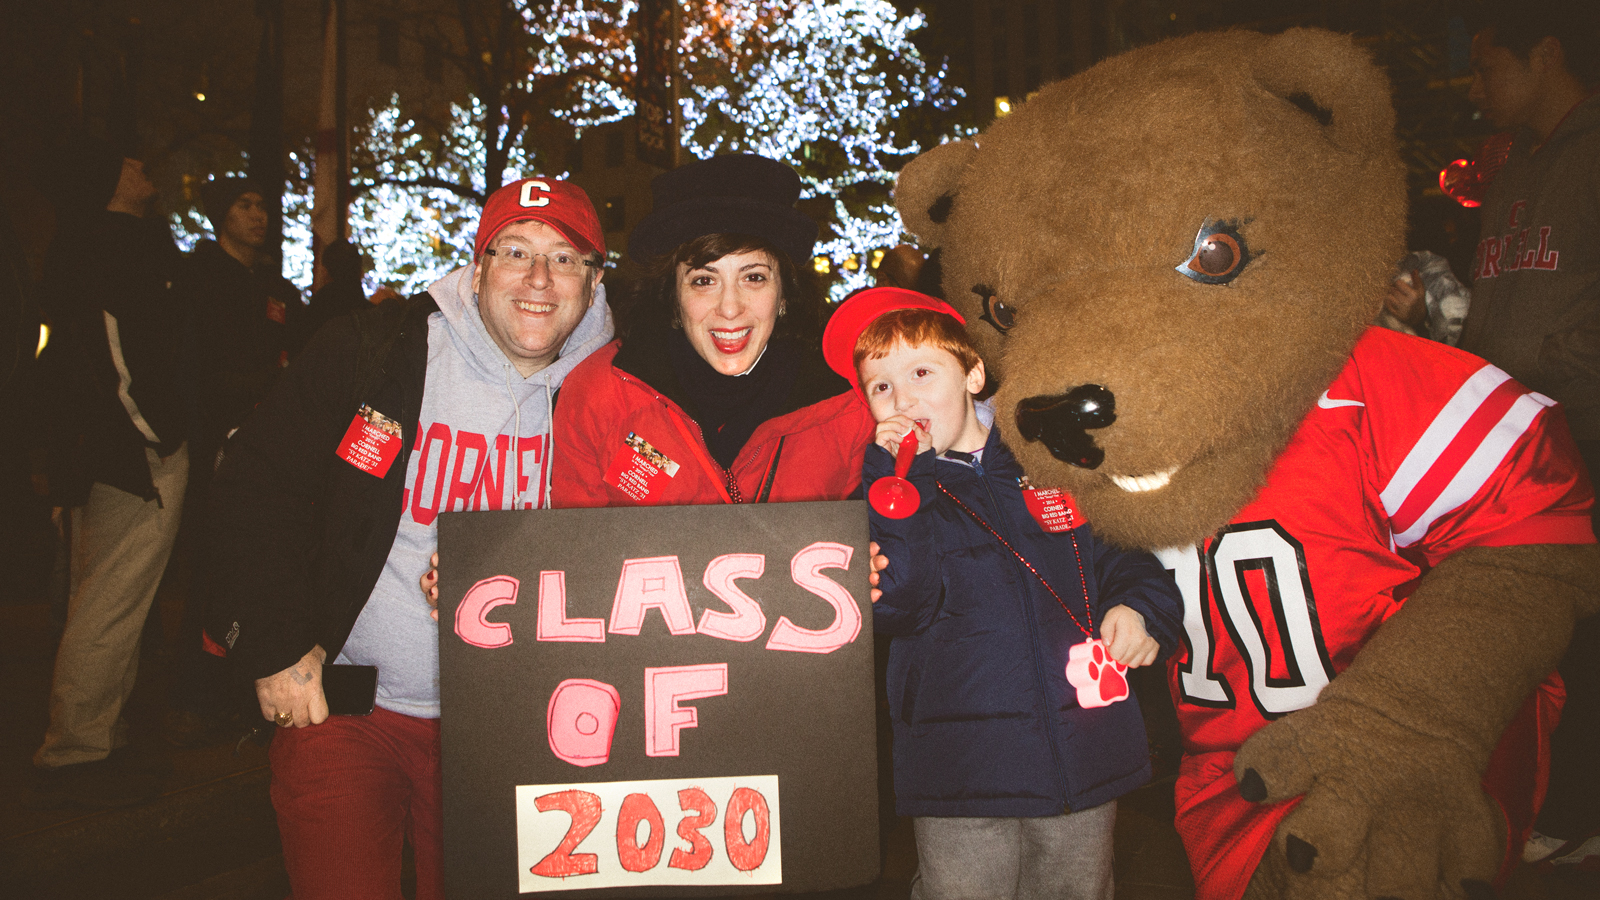 Cornell fans and Cornell mascot Touchdown pose for a picture at the Sy Katz Parade in New York City